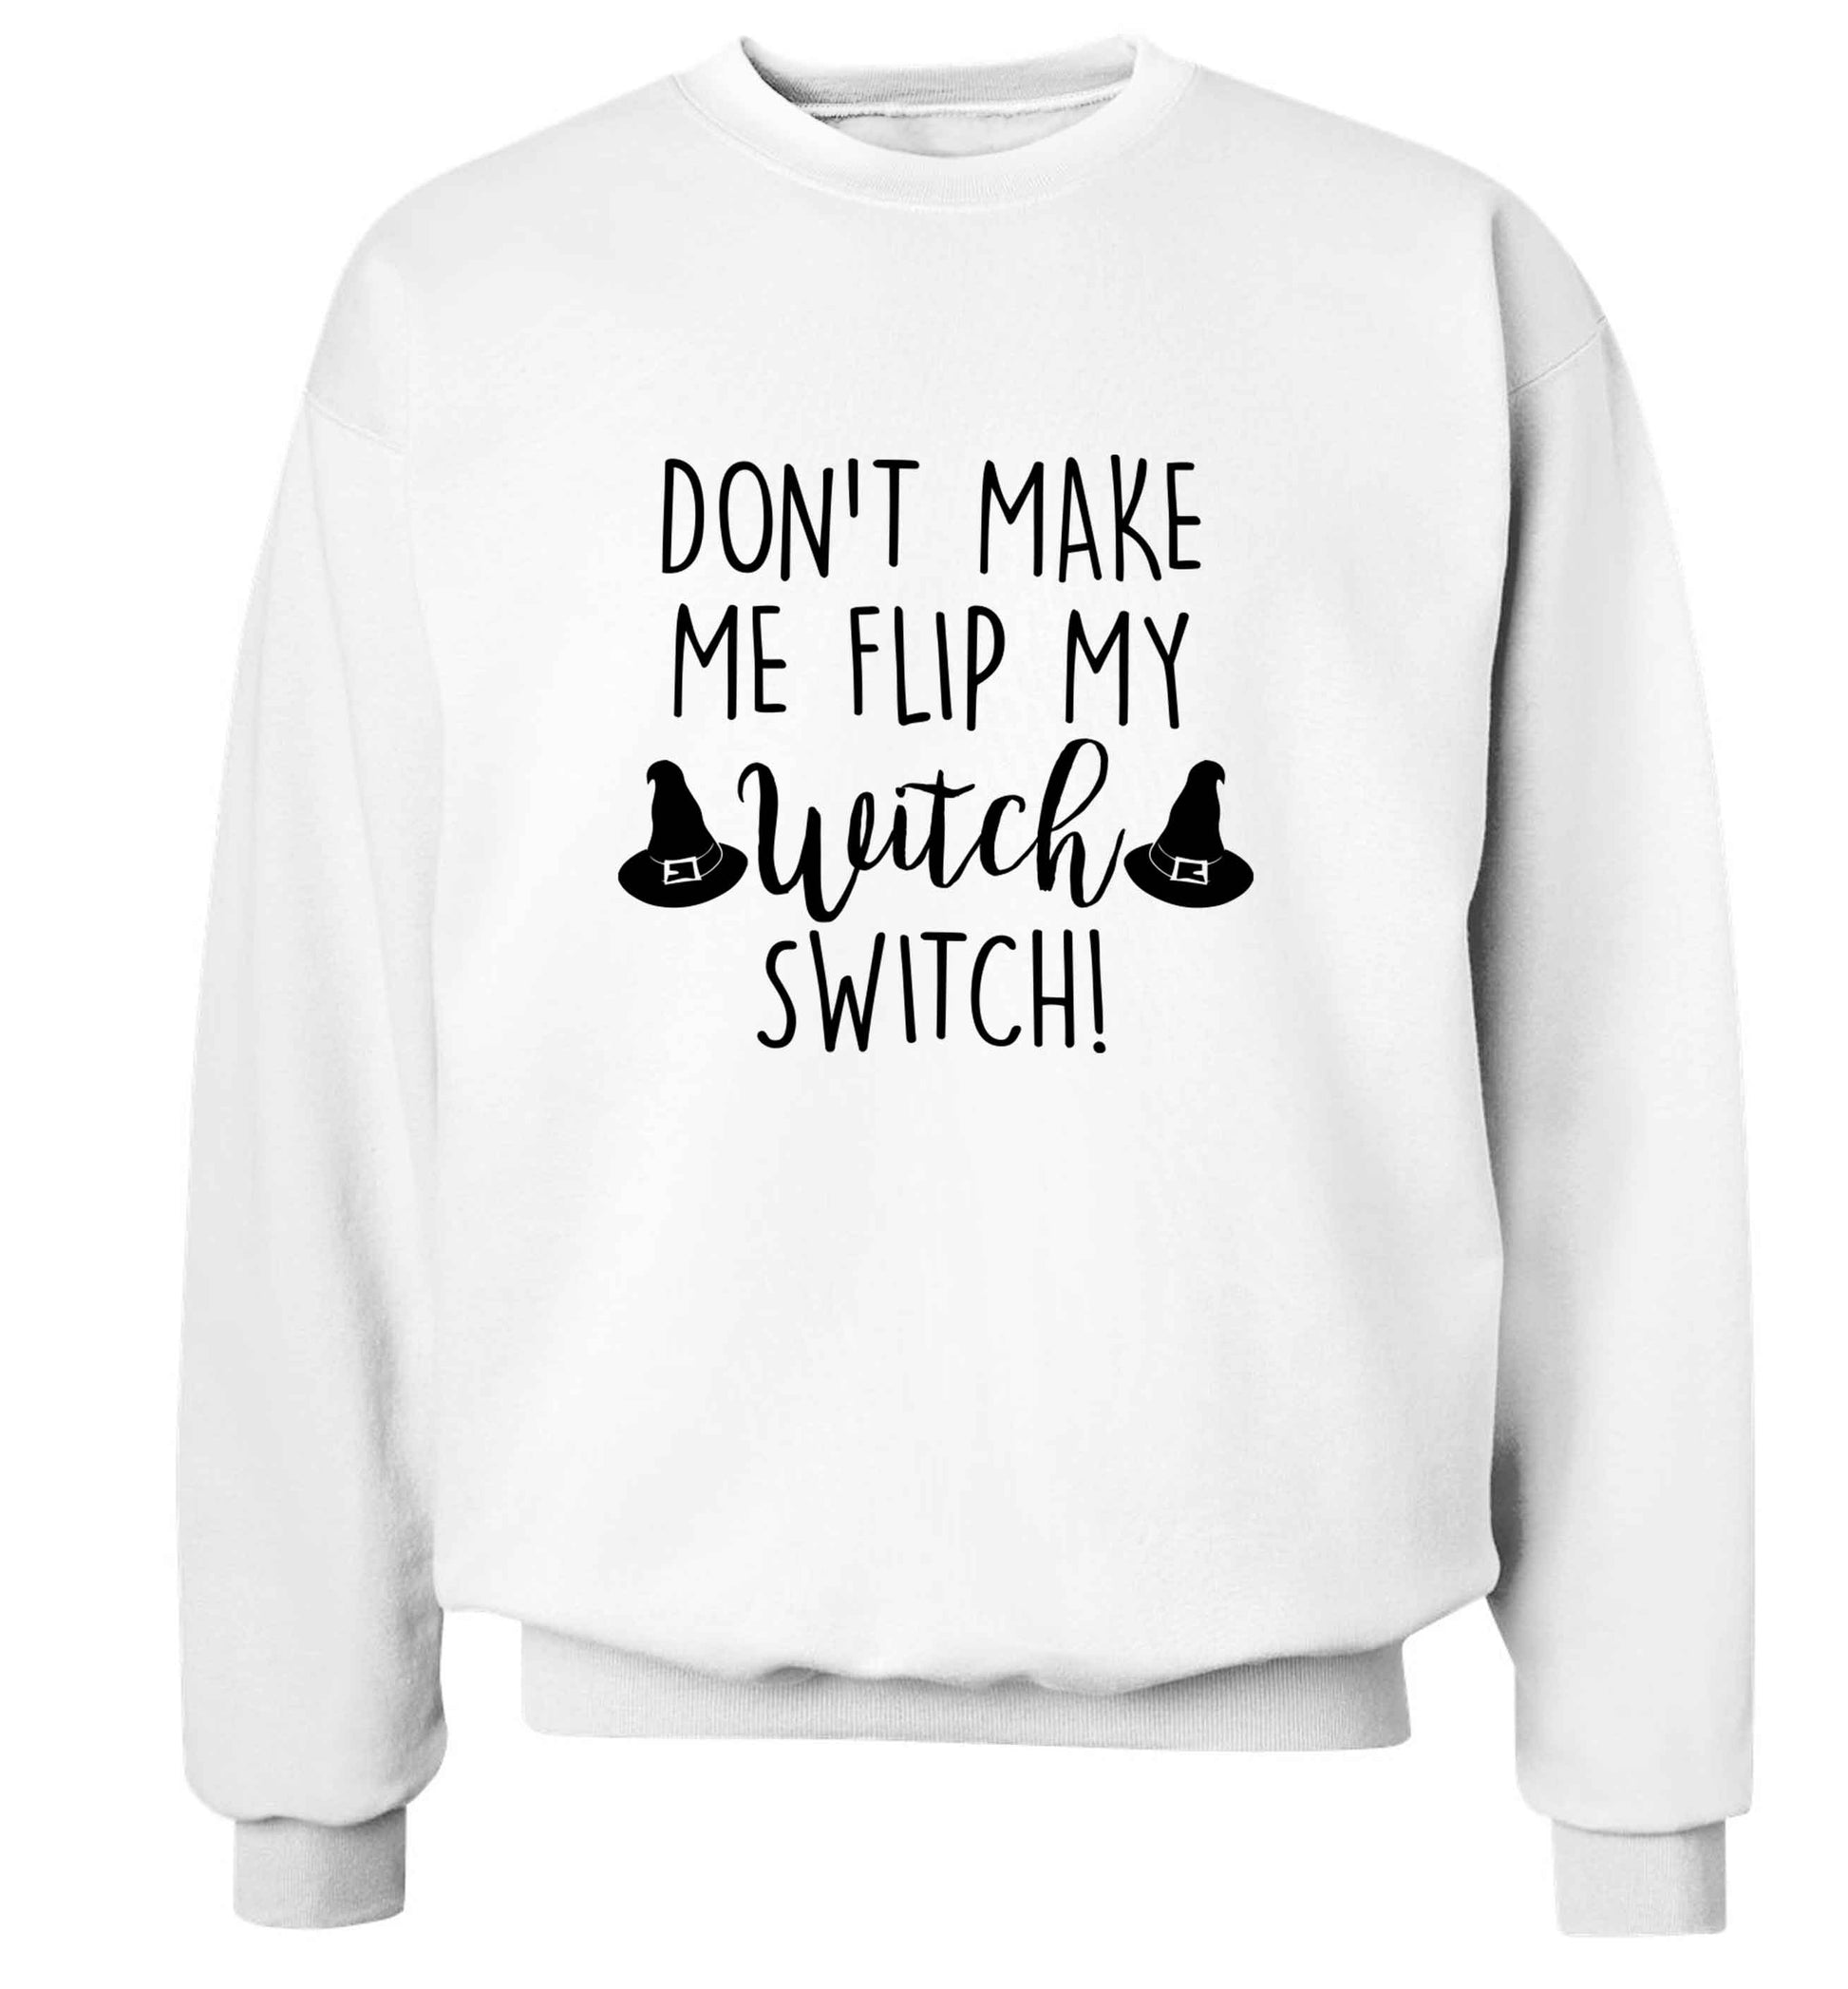 Don't make me flip my witch switch adult's unisex white sweater 2XL